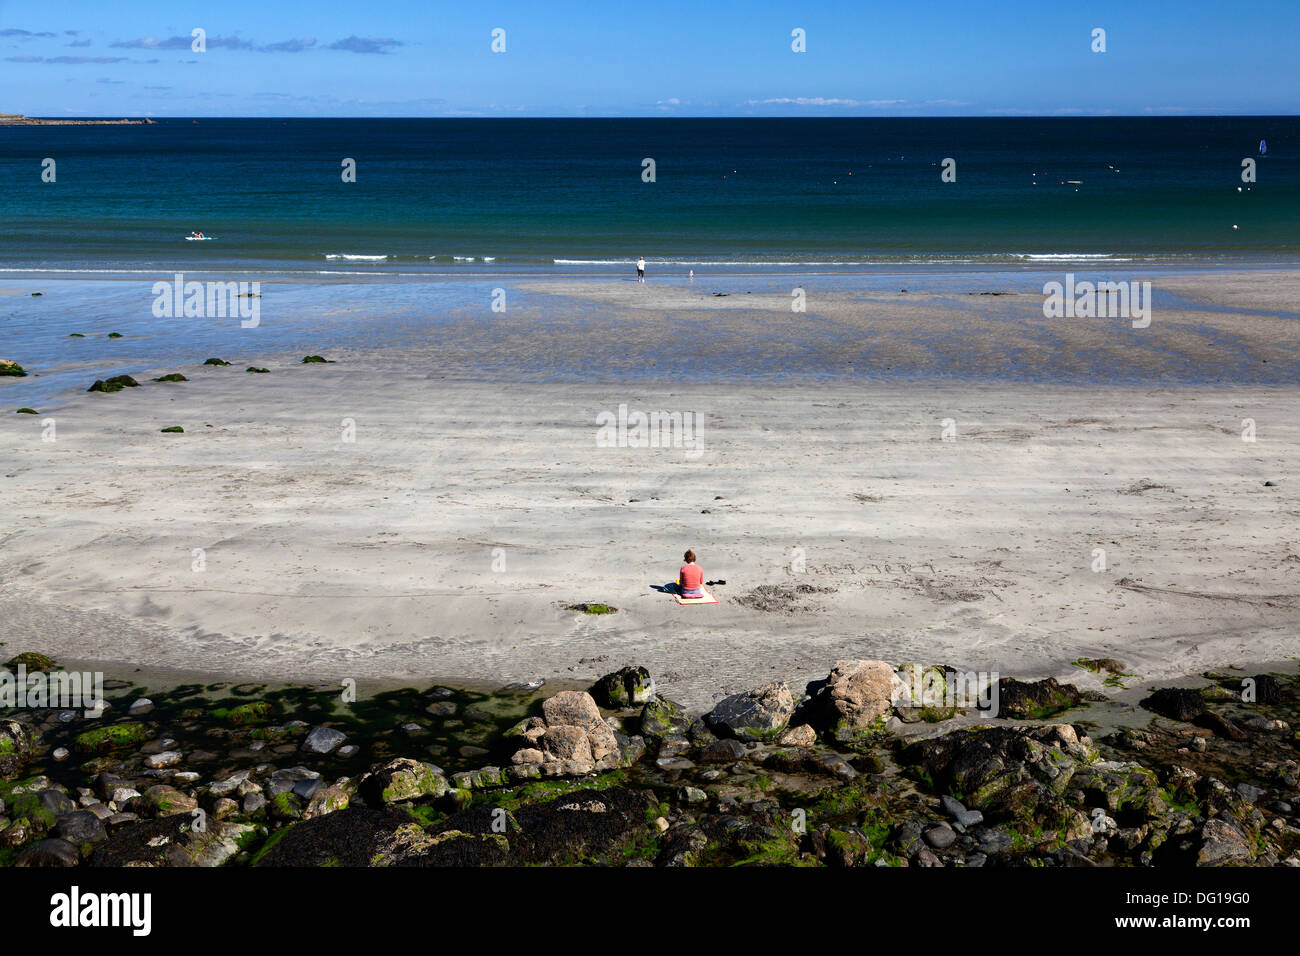 solitary-woman-sitting-on-the-beach-cove